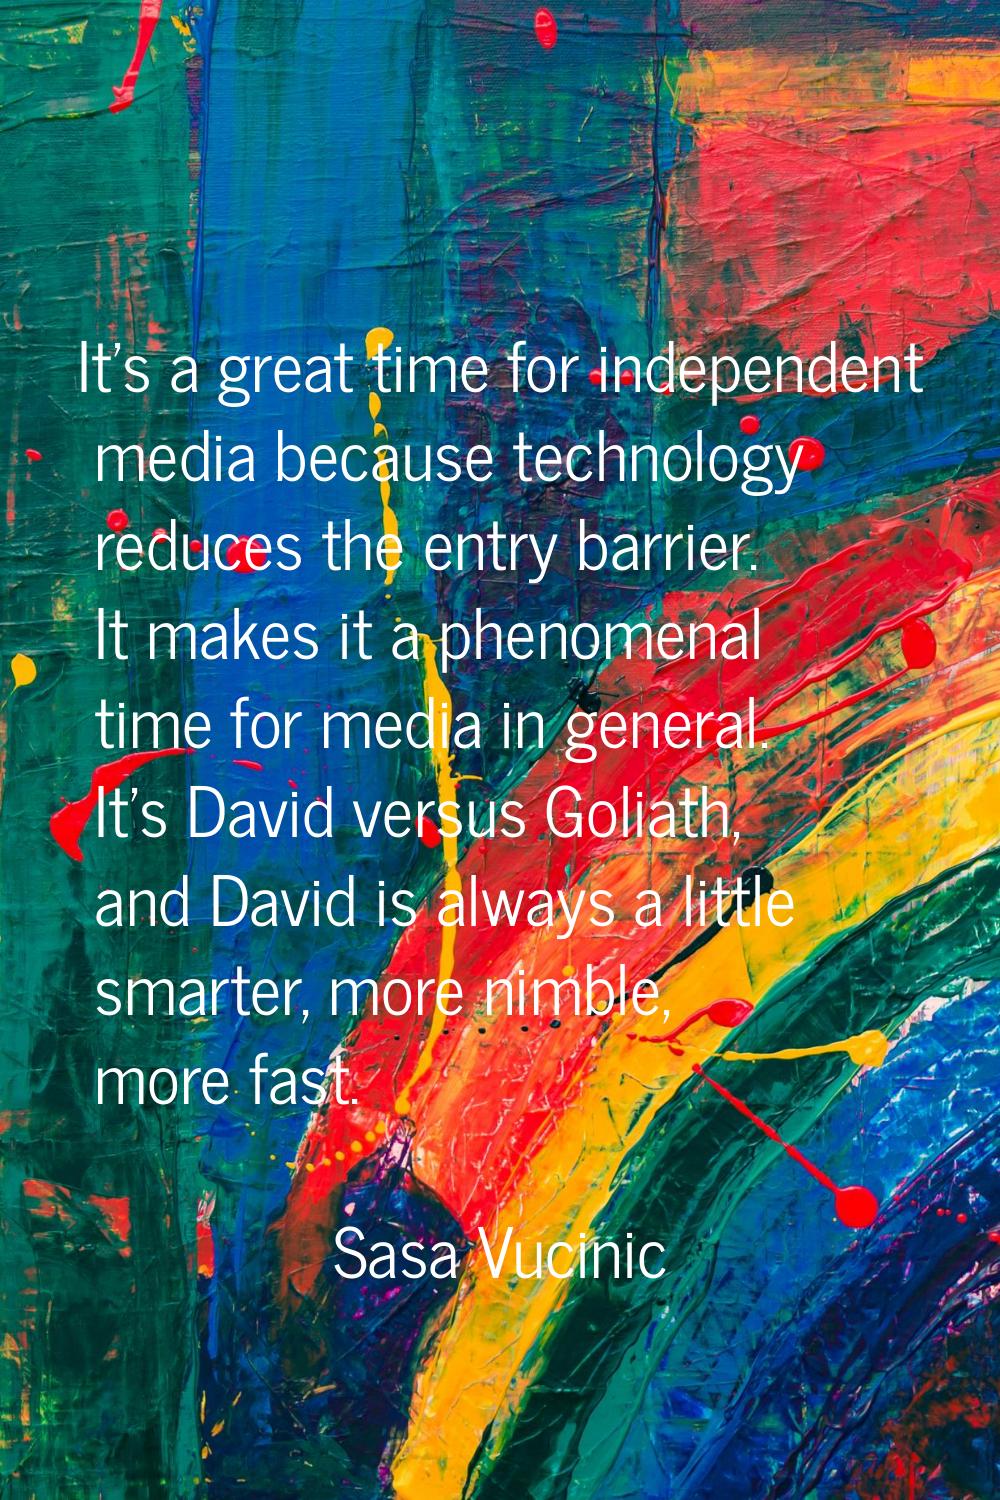 It's a great time for independent media because technology reduces the entry barrier. It makes it a